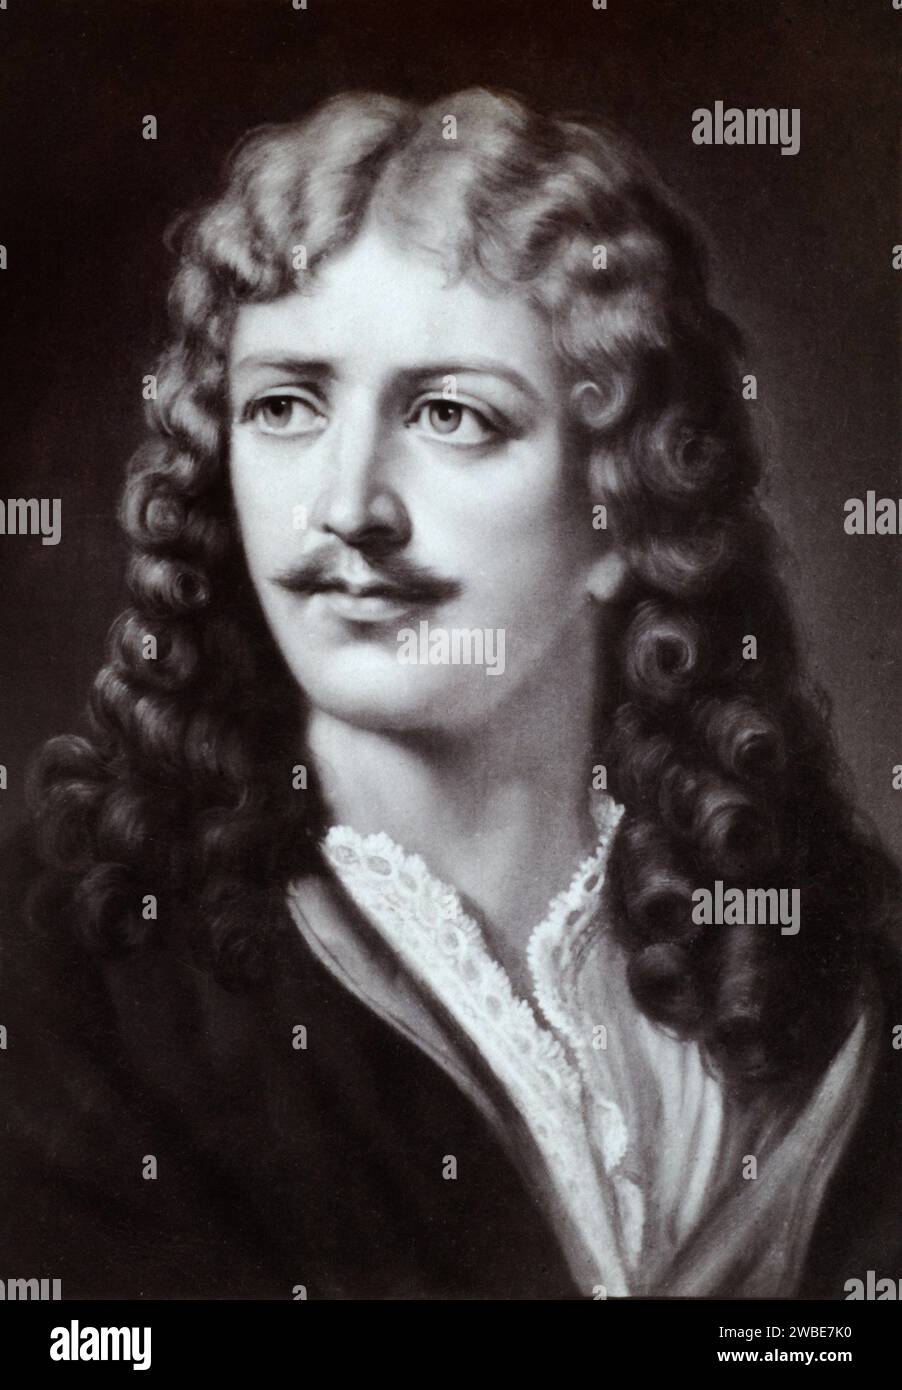 Portrait of Molière or Jean-Baptiste Poquelin (1622-1673) French dramatist. Vintage or Historic Black and White or Monochrome Image. Stock Photo